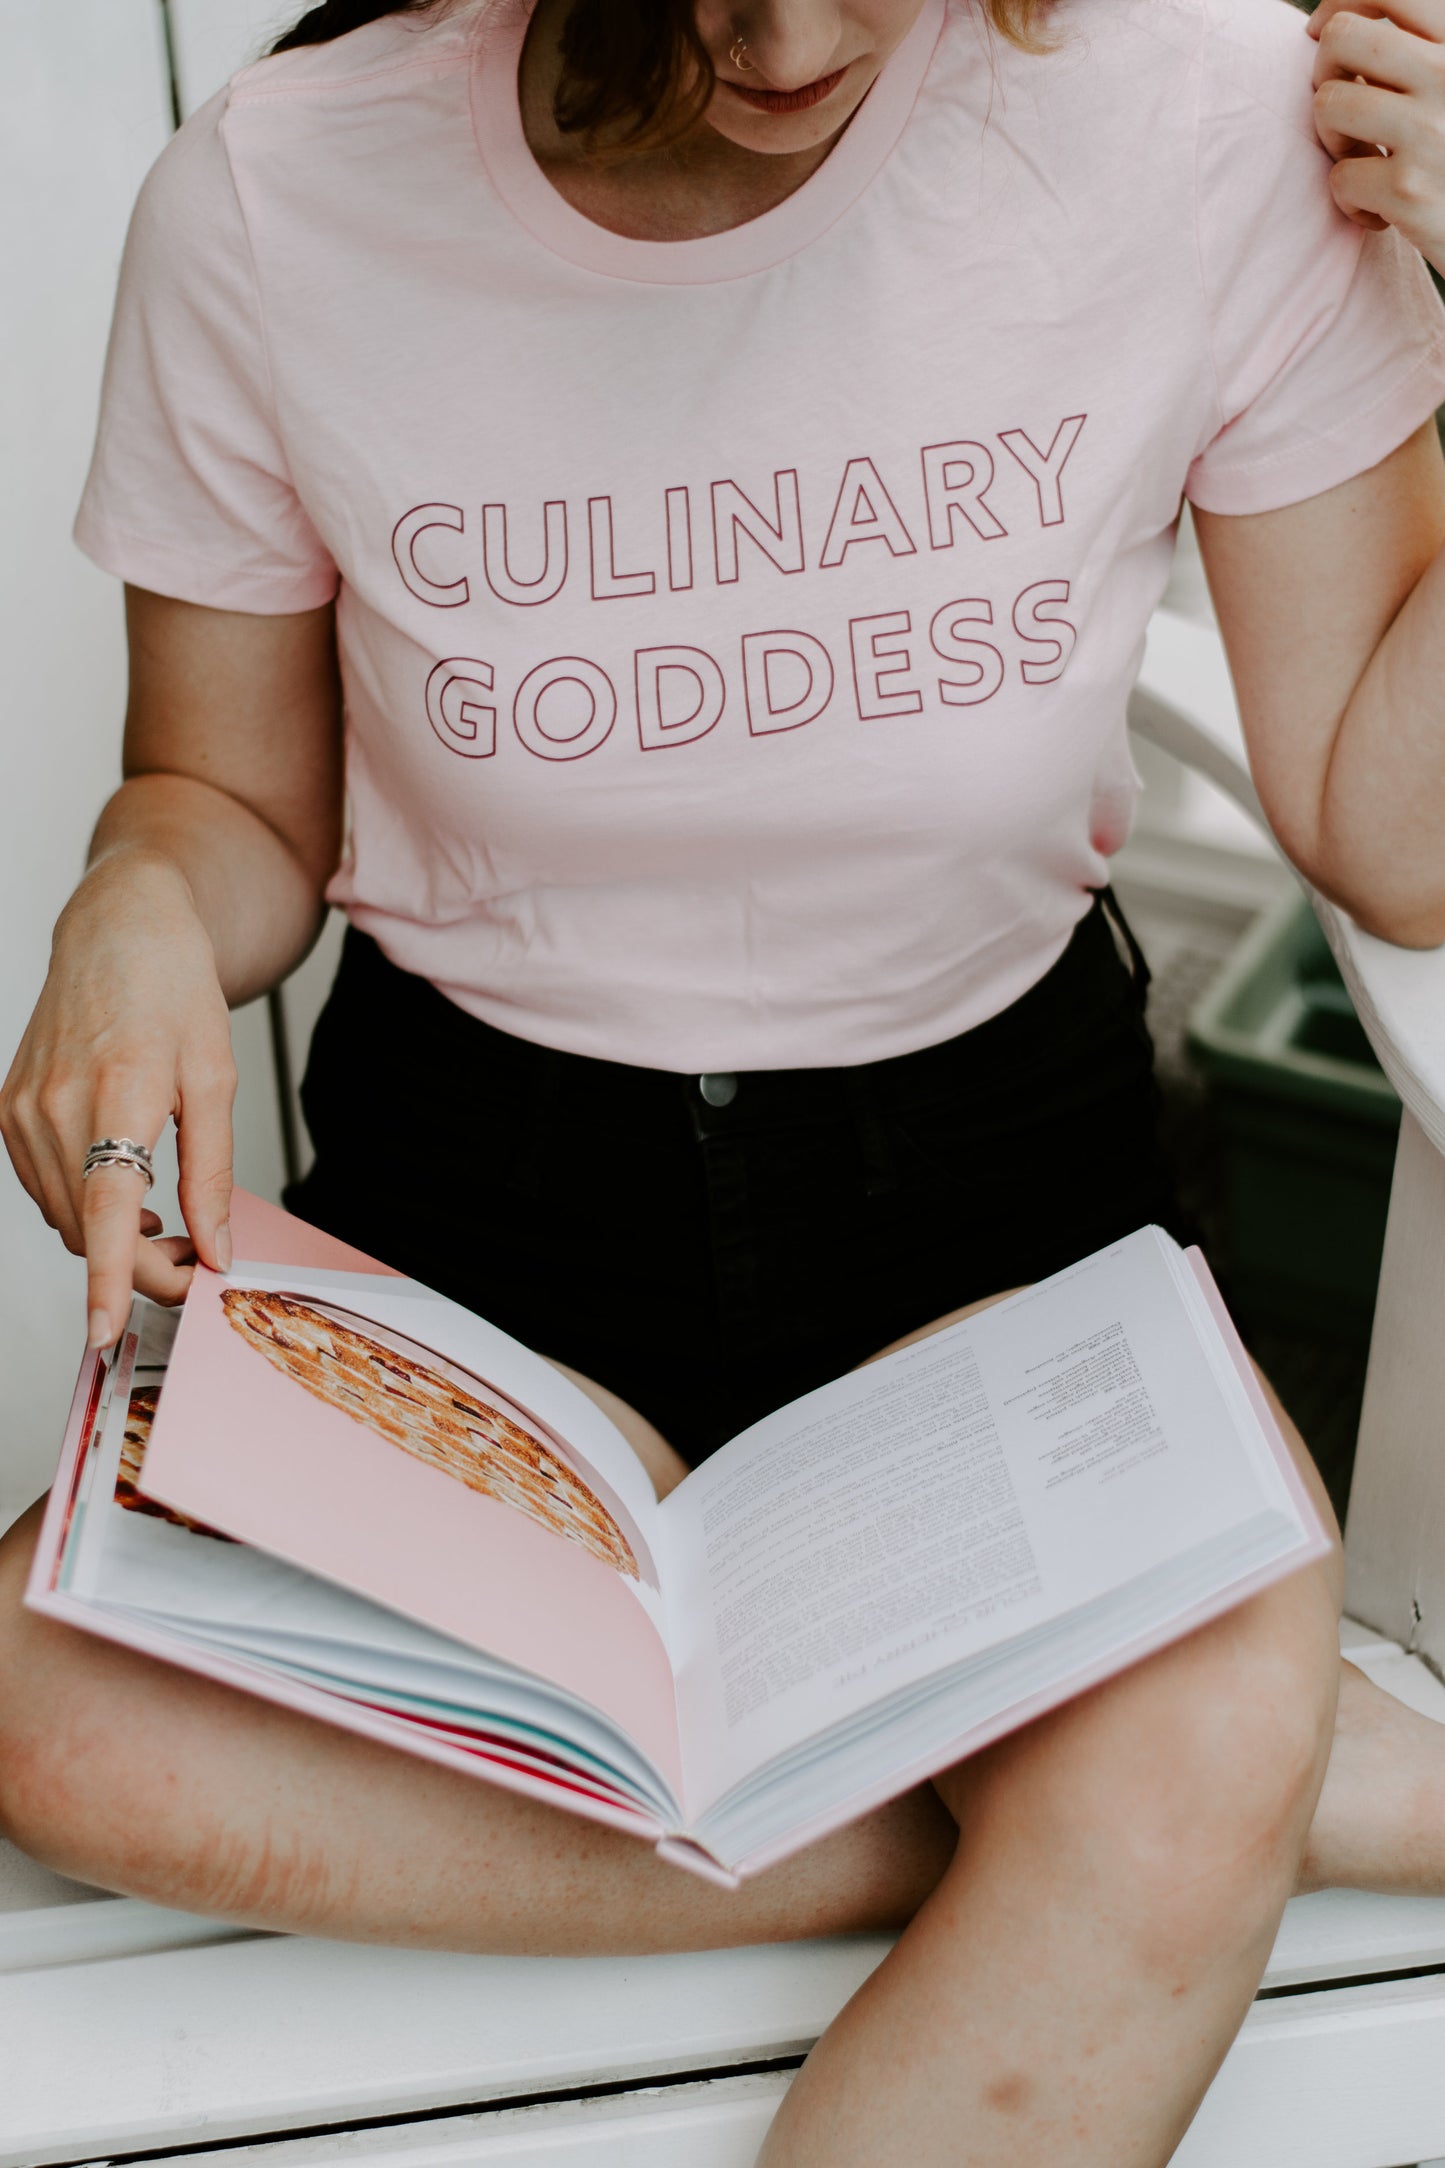 A woman wearing a pink Culinary Goddess tee with black shorts reading a cookbook